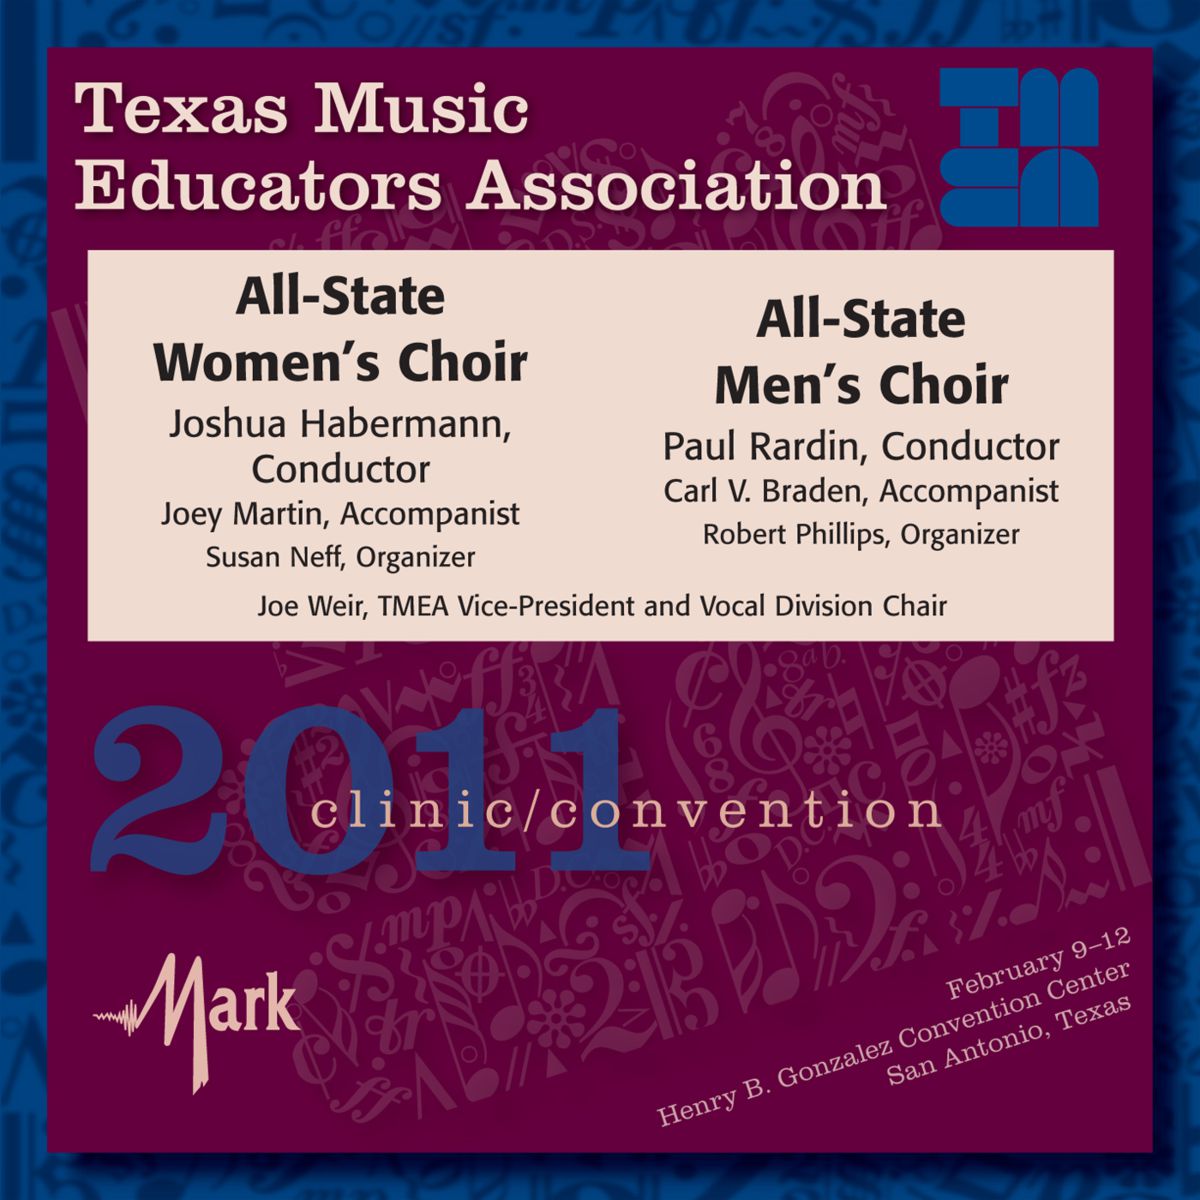 2011 Texas Music Educators Association: All-State Women's Choir and All-State Men's Choir - cliquer ici